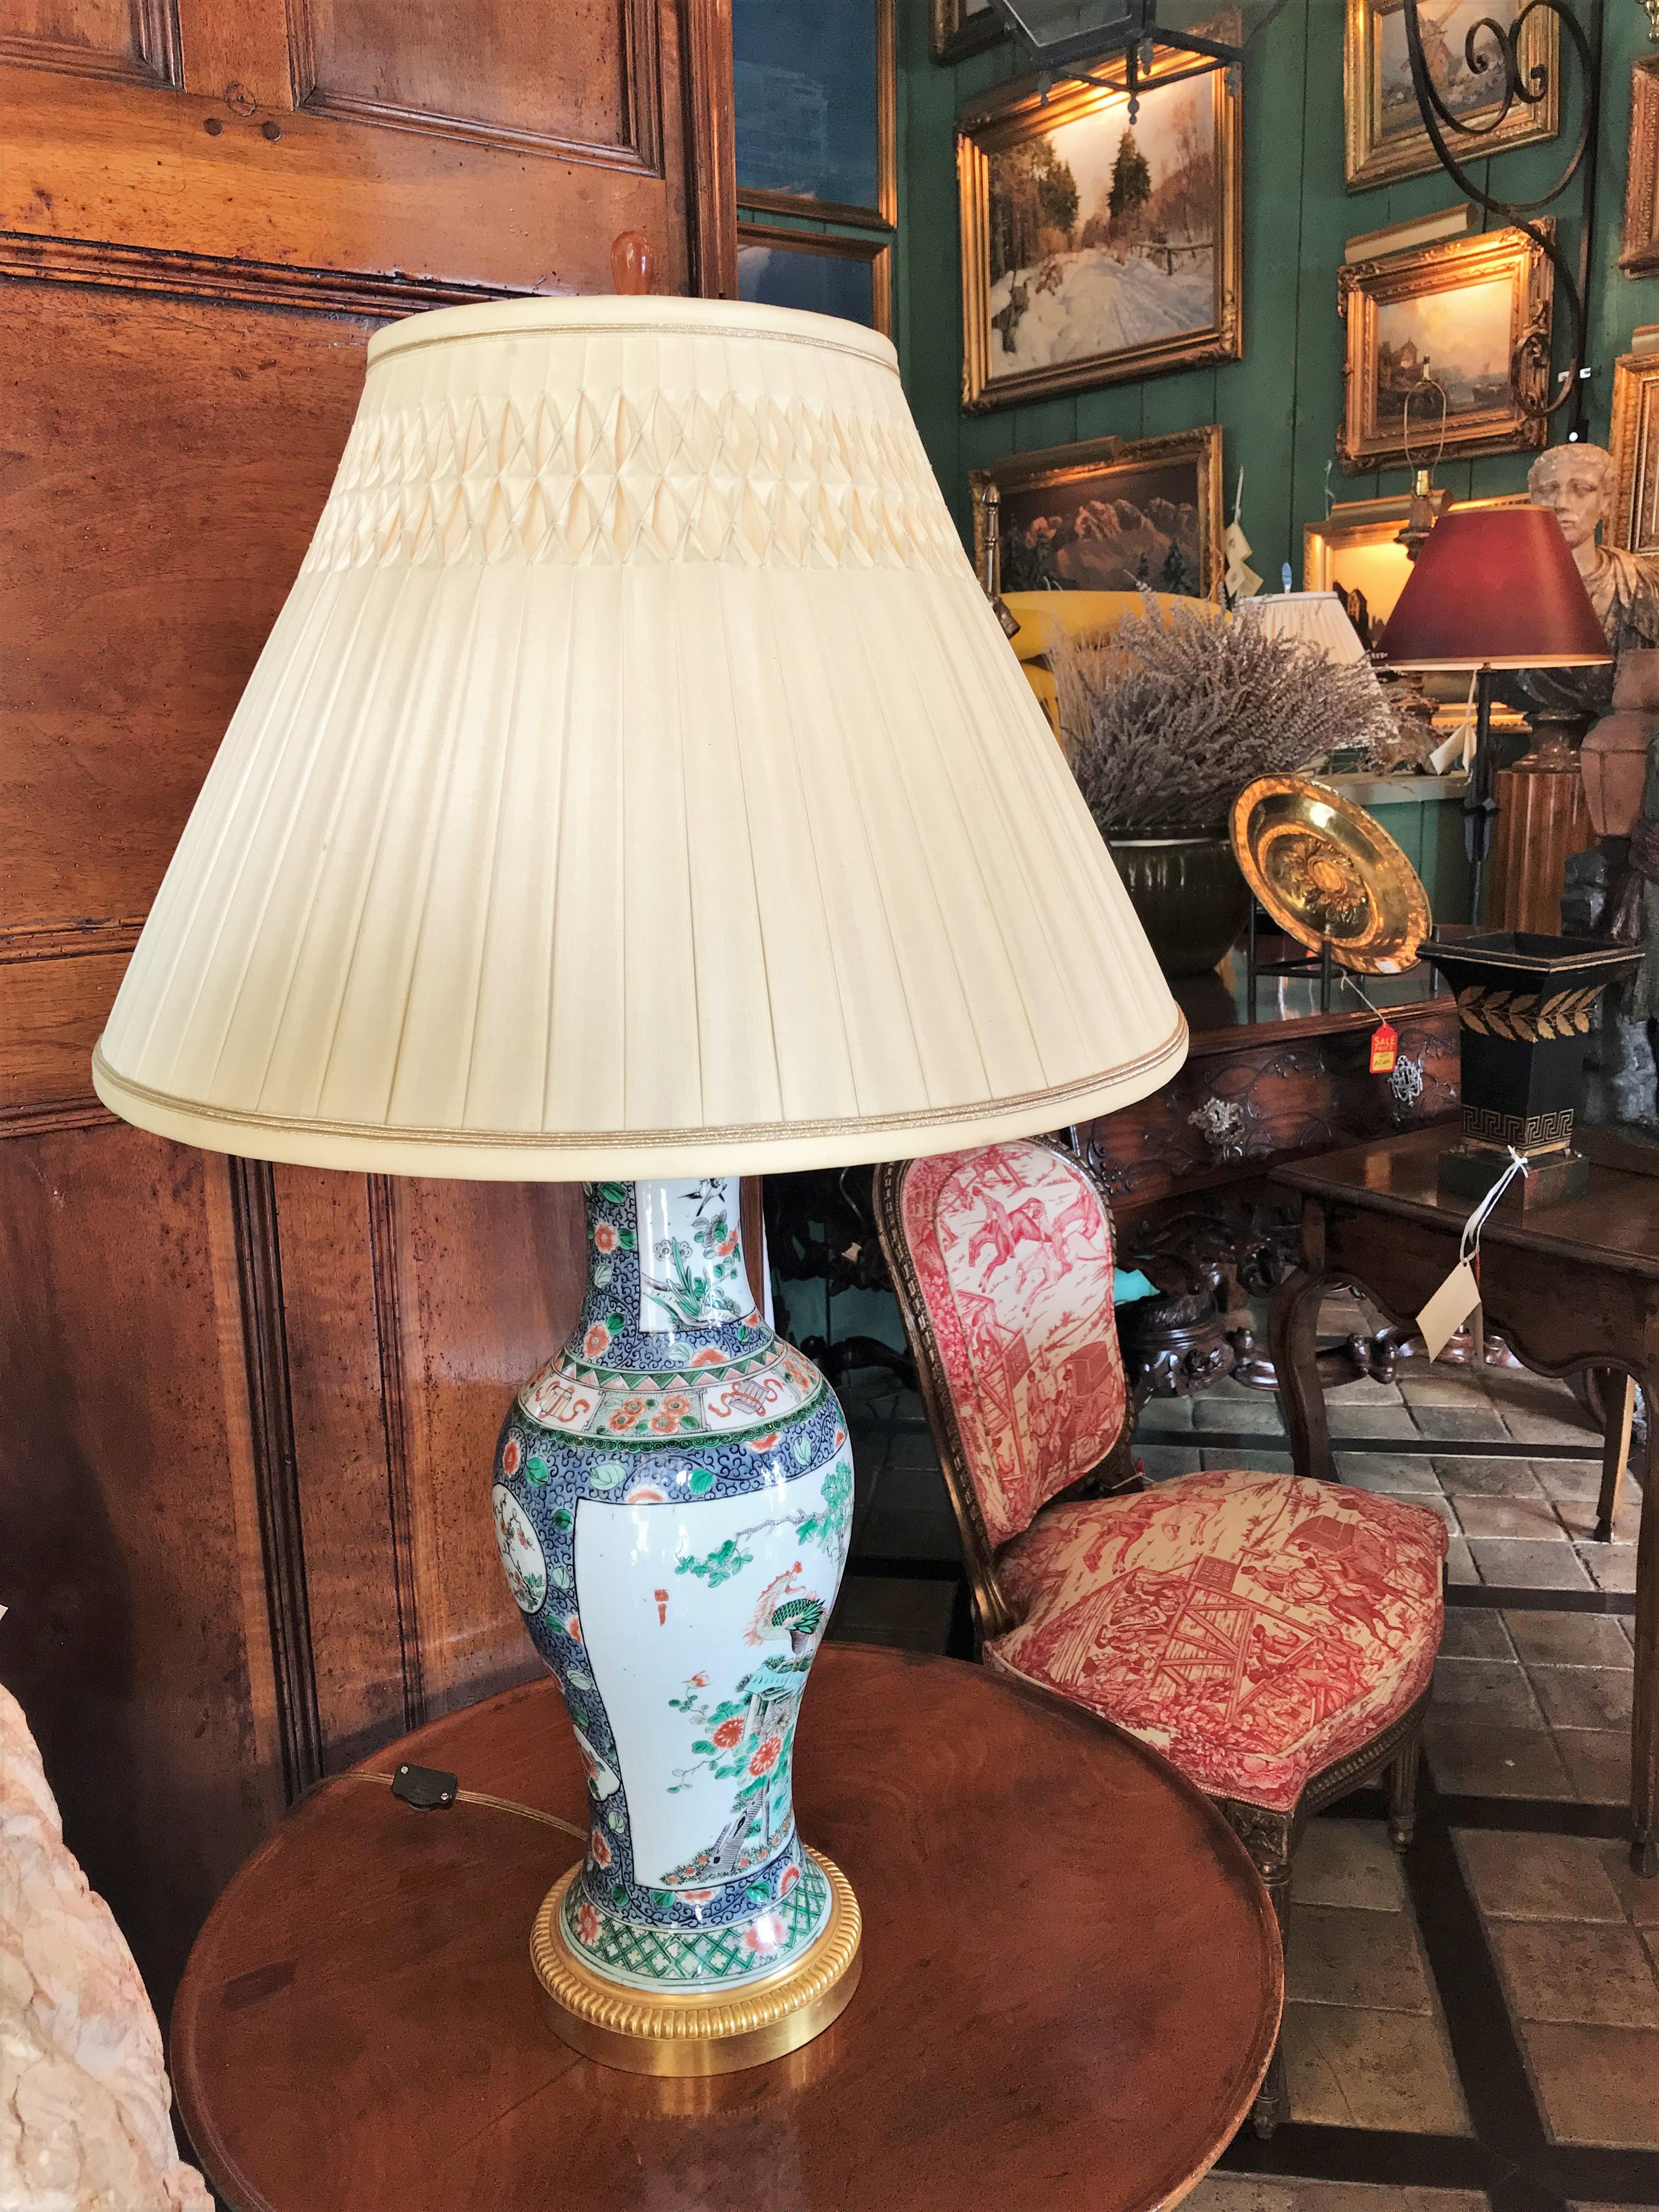 Elegant Chinese Famille Rose Vase and Gilt Bronze Mount, Side Table Lamp antique . Very fine 19th century Chinese Famille rose Baluster vases with 19th century gilt bronze mounts wired as lamps With Amber finial. Decorated with an array of symbolic